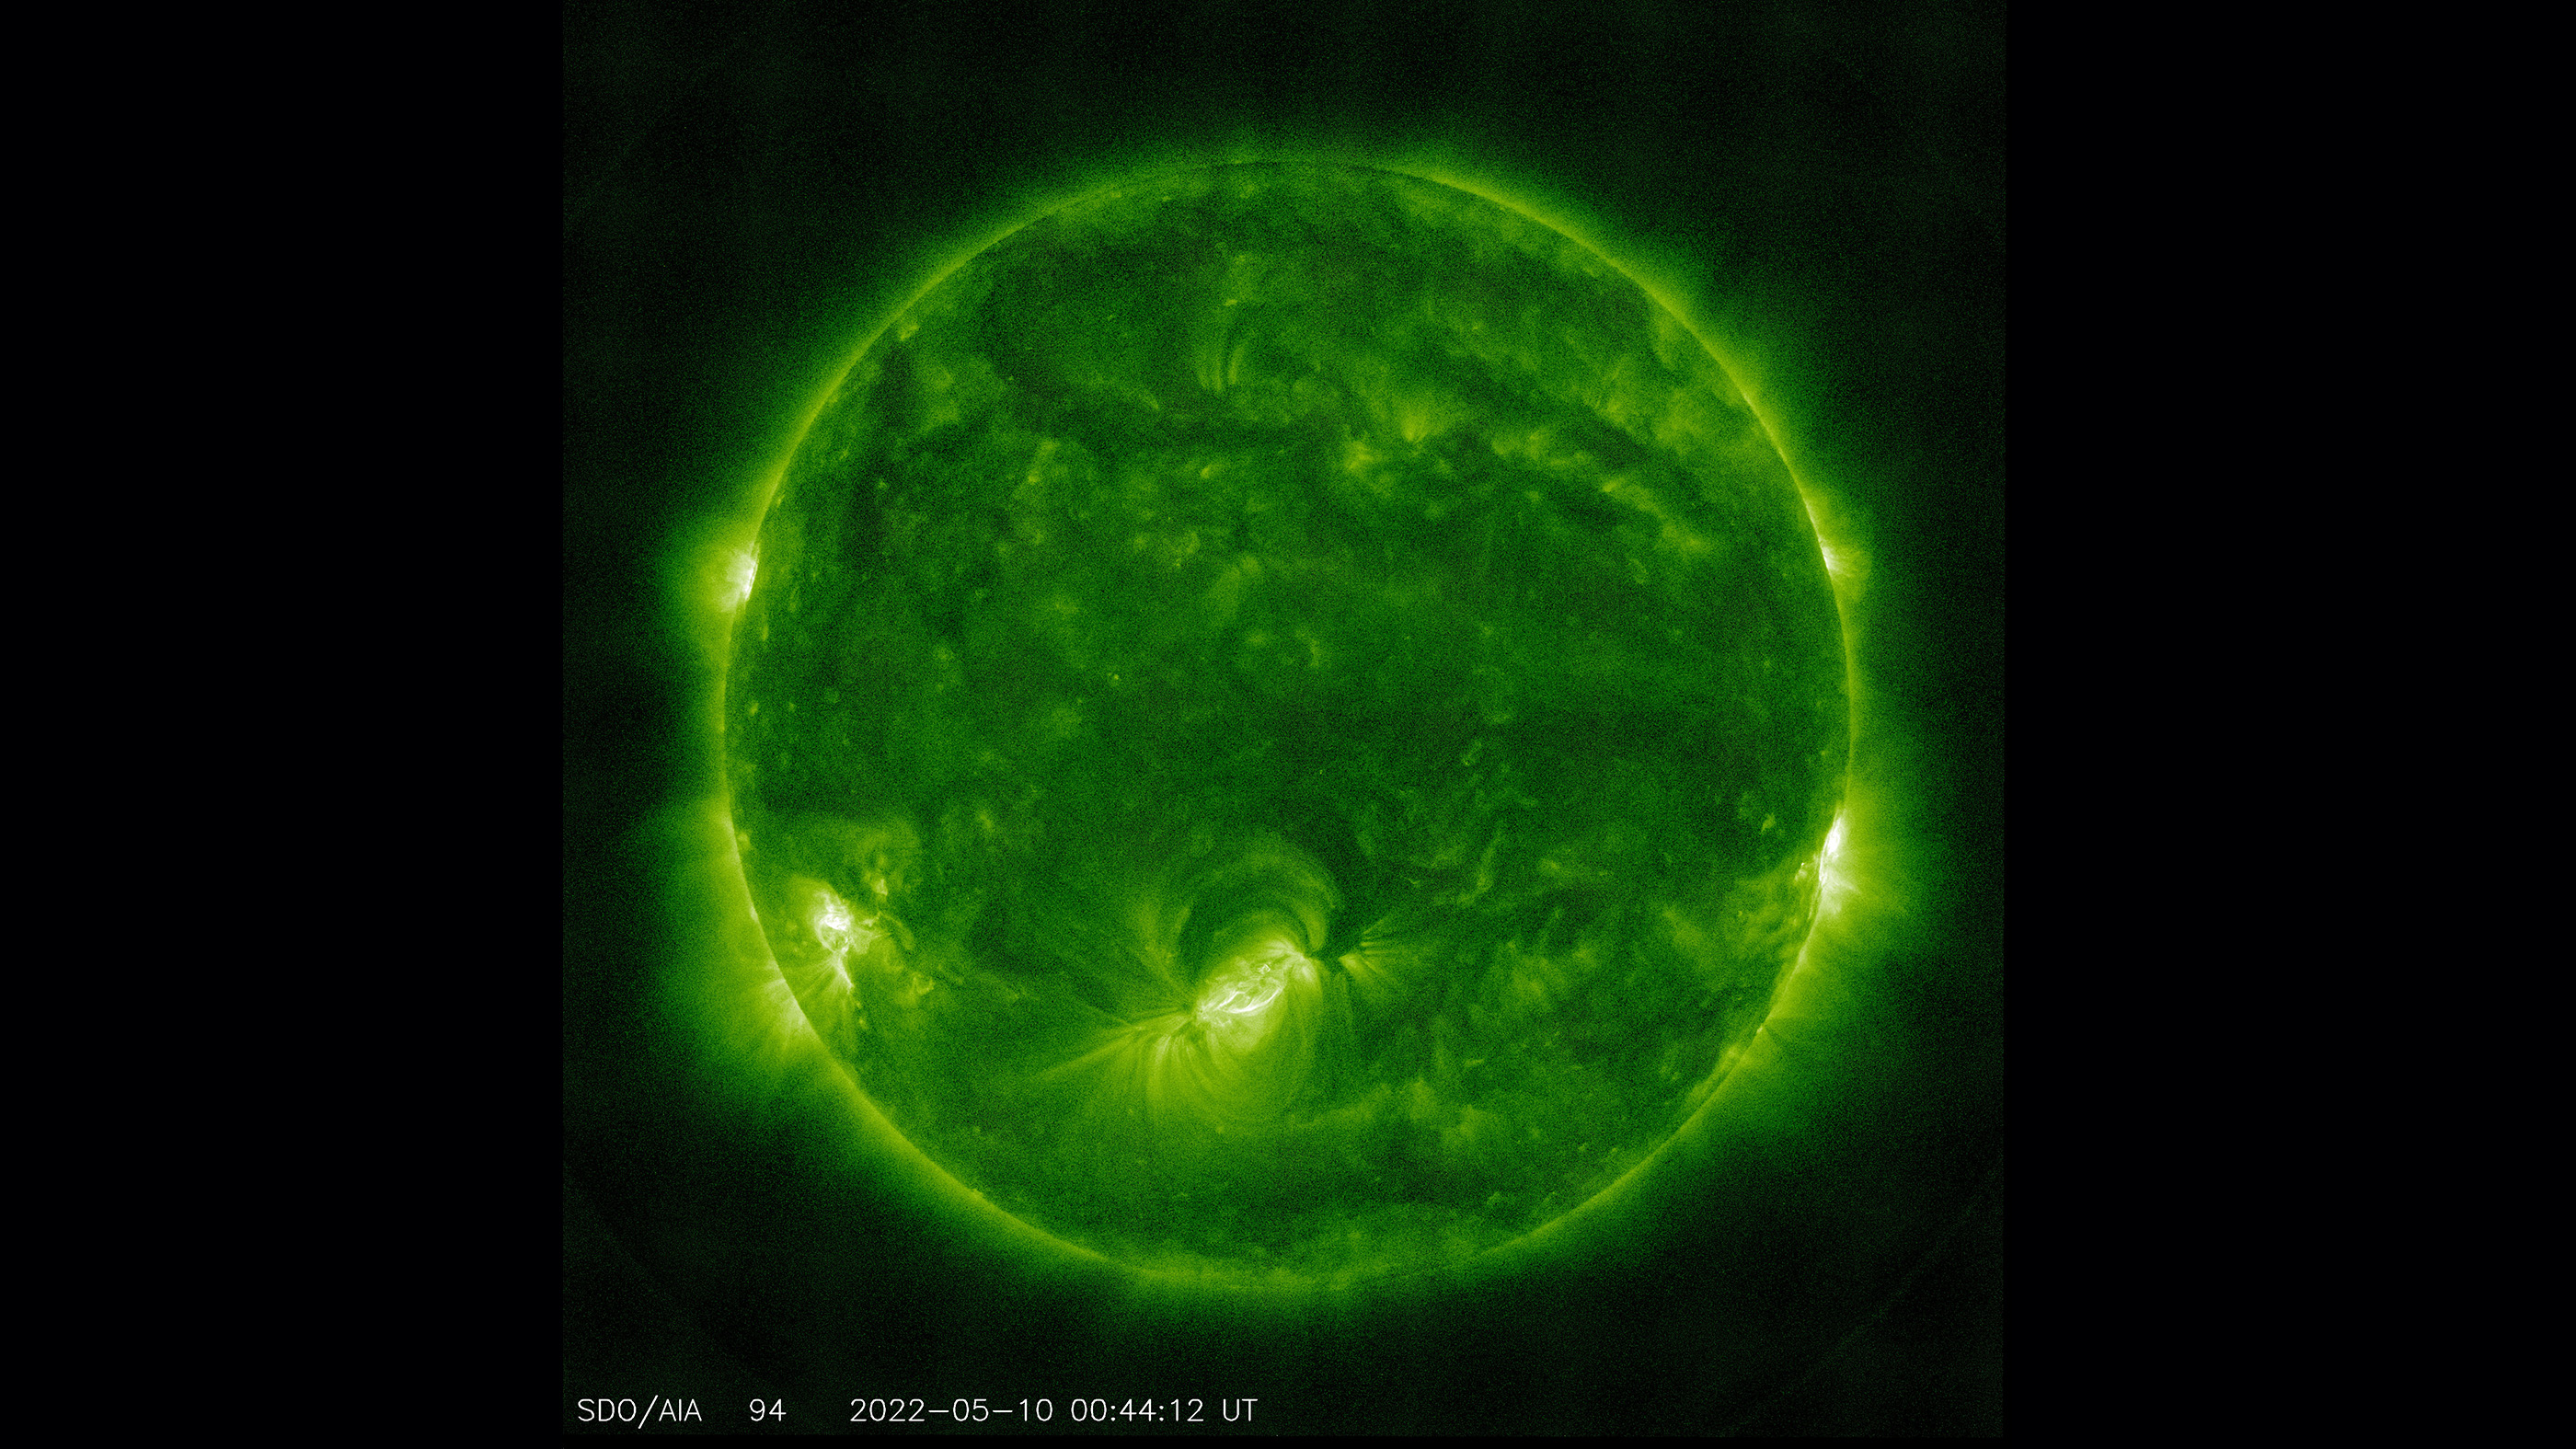 Shortly before 9 a.m. in New York on Tuesday, when the Solar Dynamics Observatory took this photo of the sun at a wavelength of 94 angstroms, the sunspot area AR3006 (lower center) emitted a powerful solar flare with a rating of X1.5